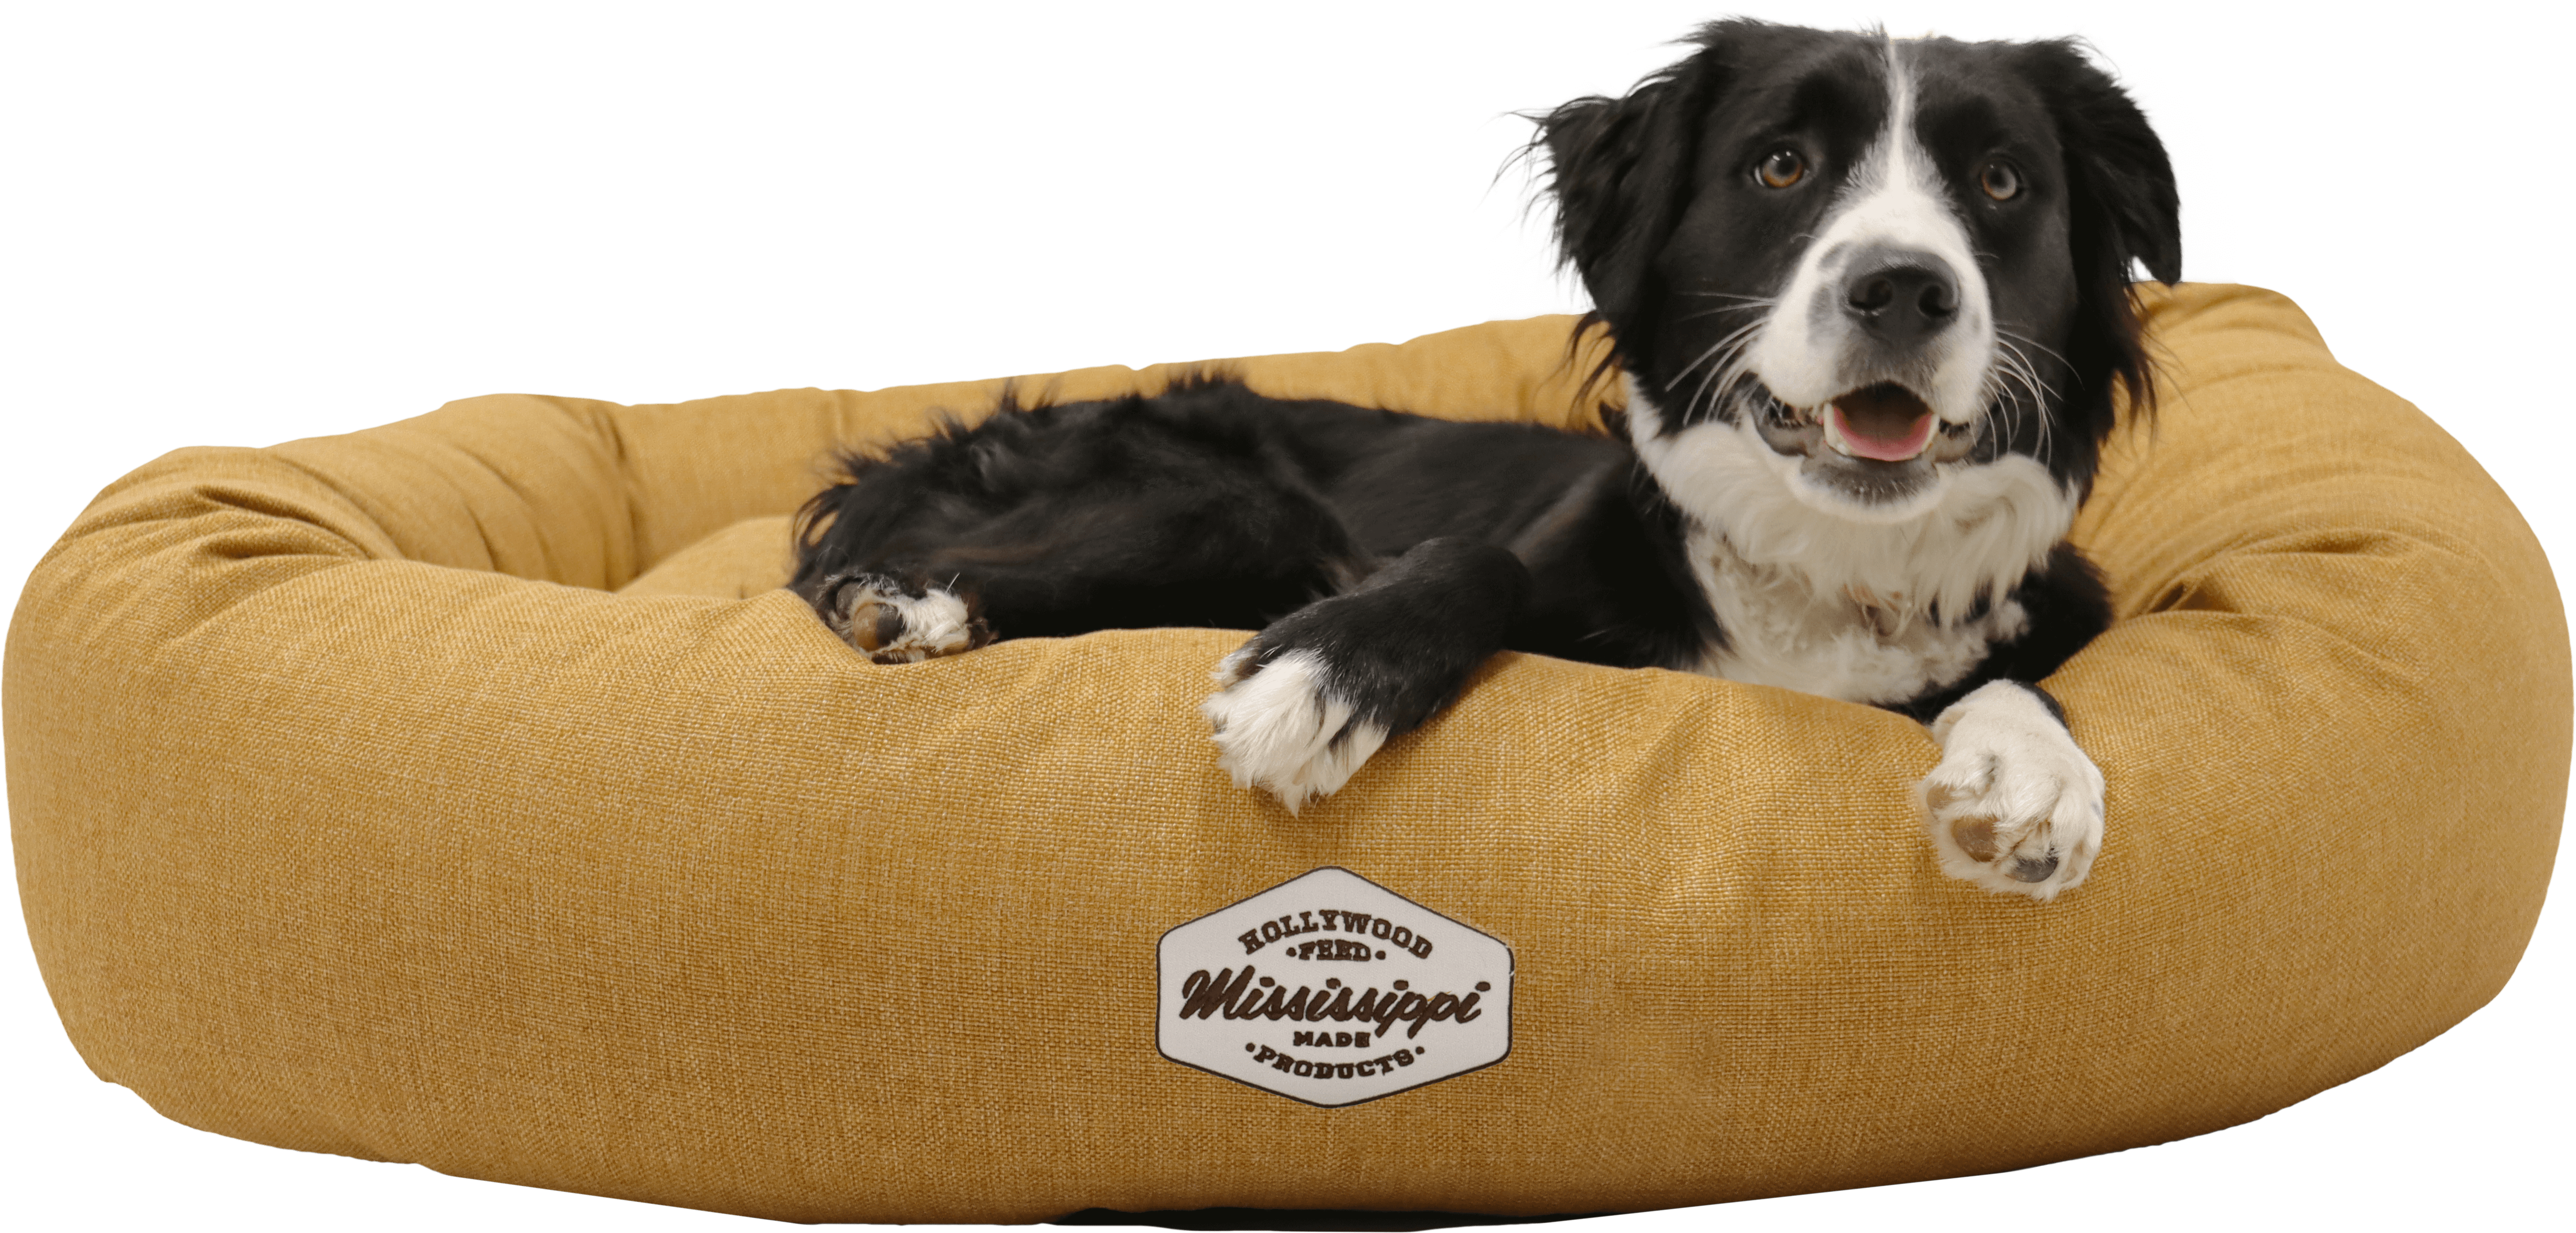 Dog laying in hollywood feed mississippi made donut bed - spice